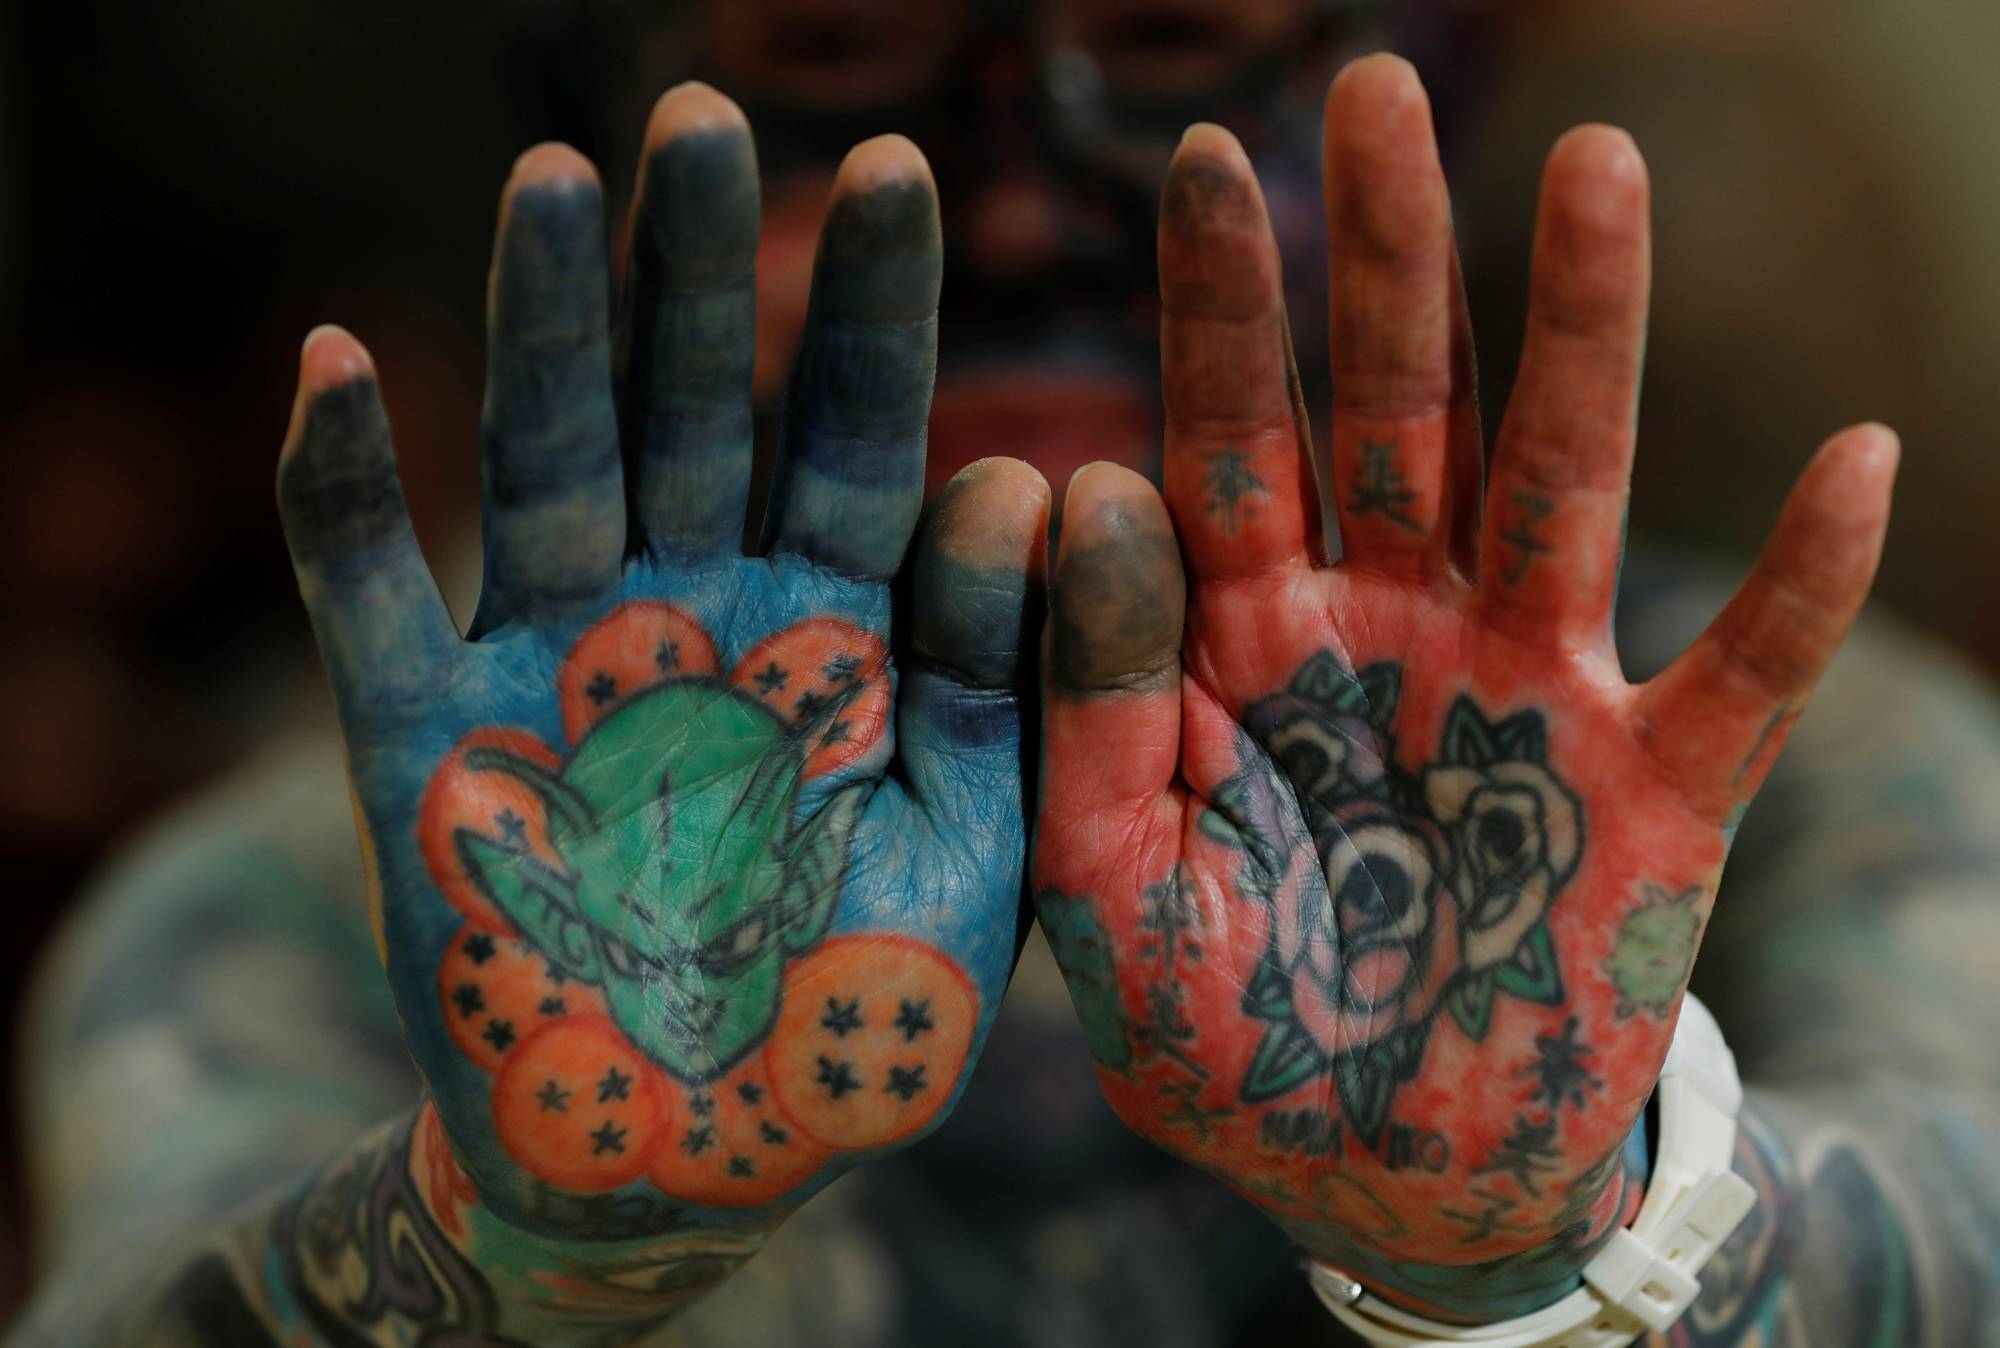 Author Hiroki Takamura, 62, shows off tattoos on his palms at the annual gathering of the Irezumi Aikokai (Tattoo Lovers Association) in Tokyo in February. | REUTERS